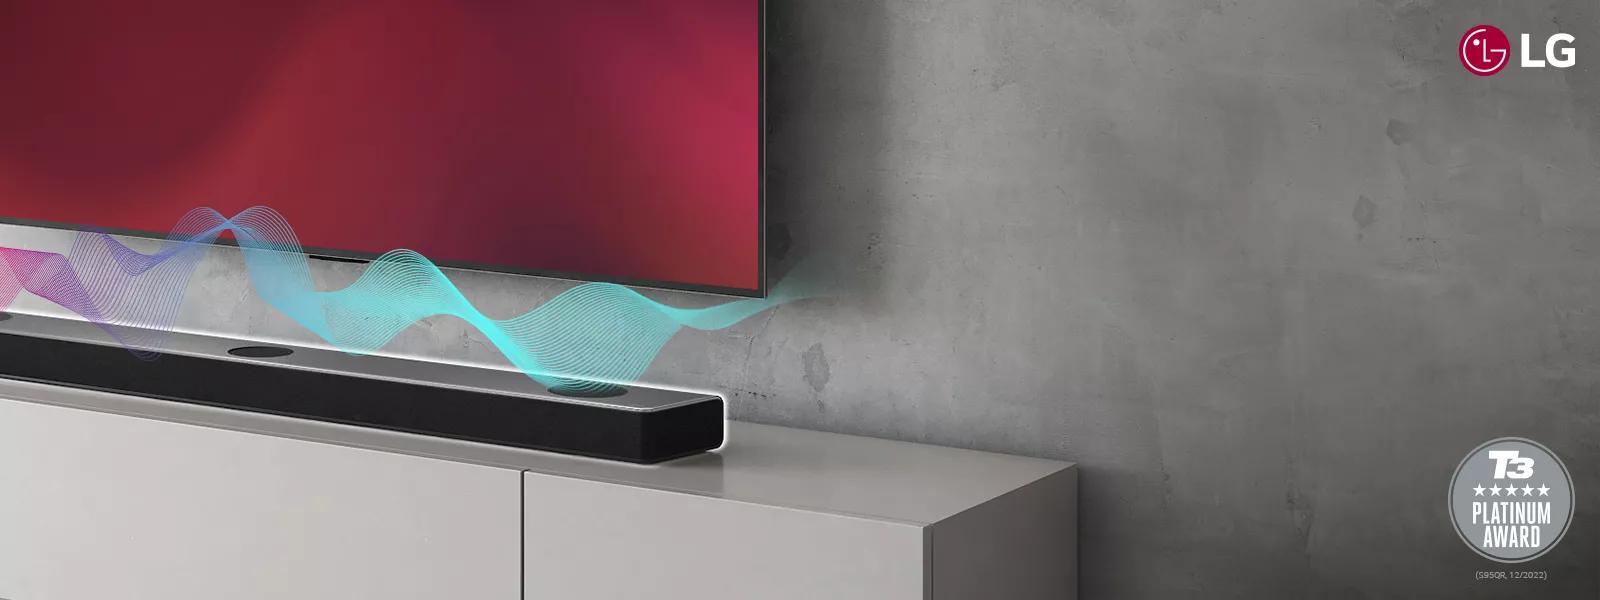 Pair your LG Sound Bar with an LG TV and enjoy a home theater experience with immersive sound.